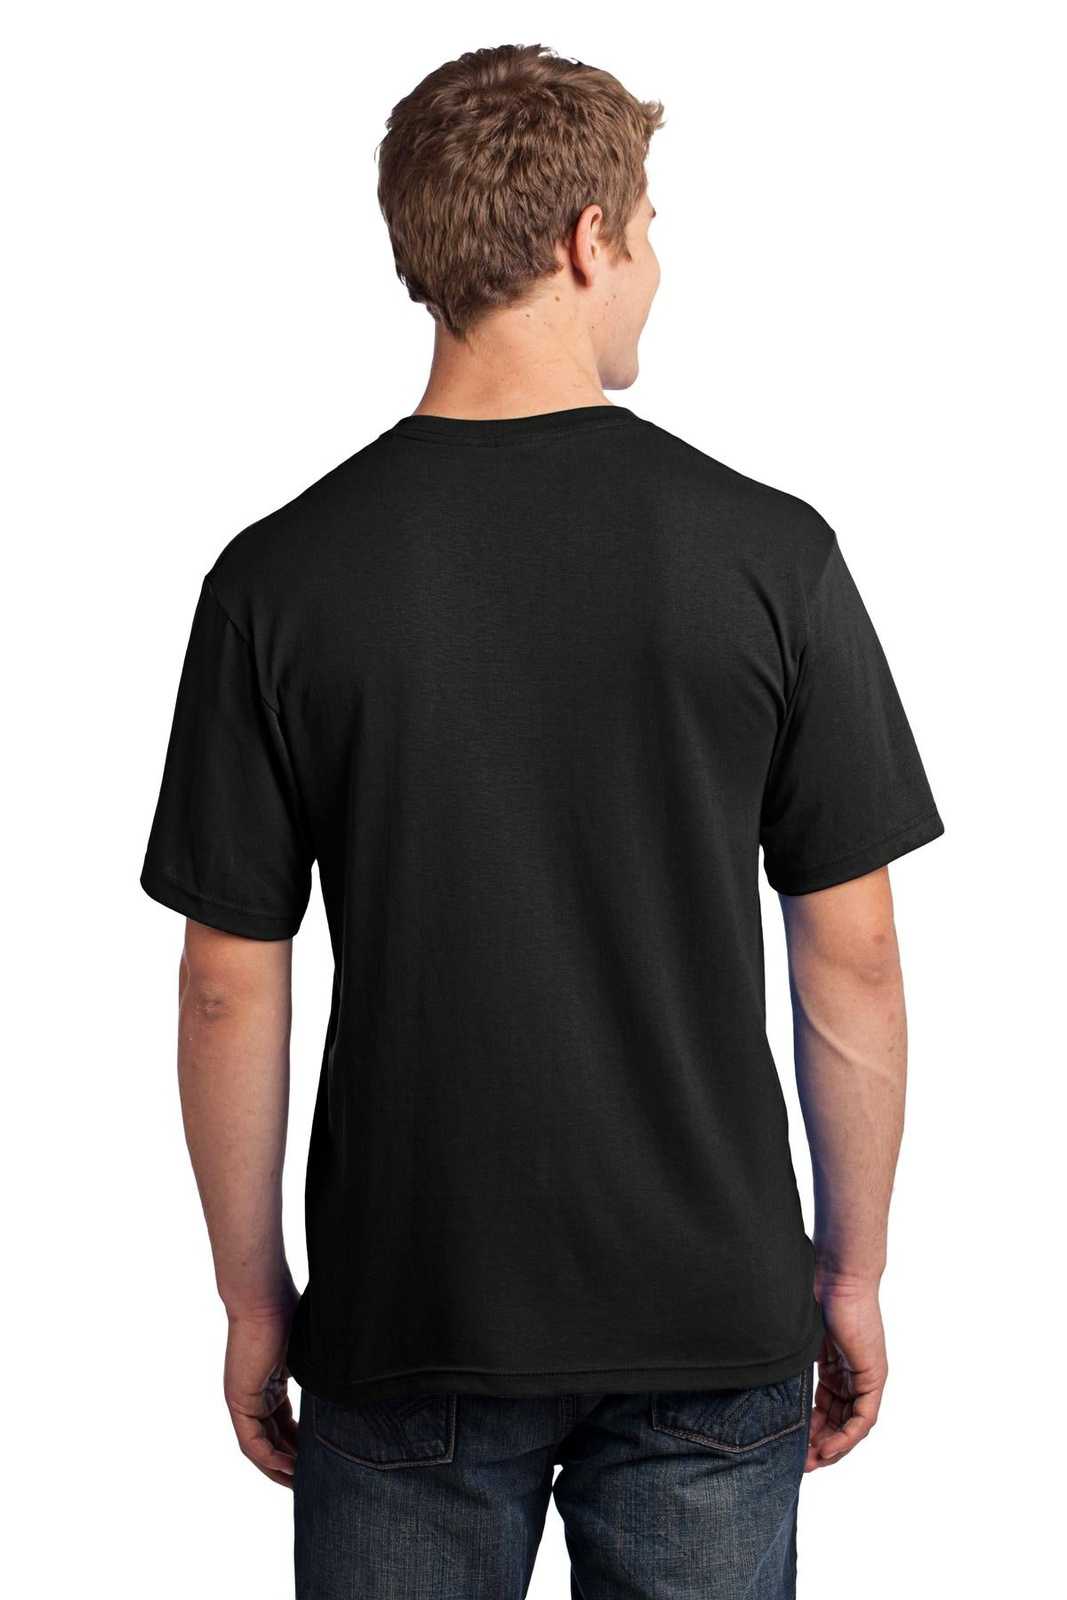 Port & Company USA100 All-American Tee - Black - HIT a Double - 1